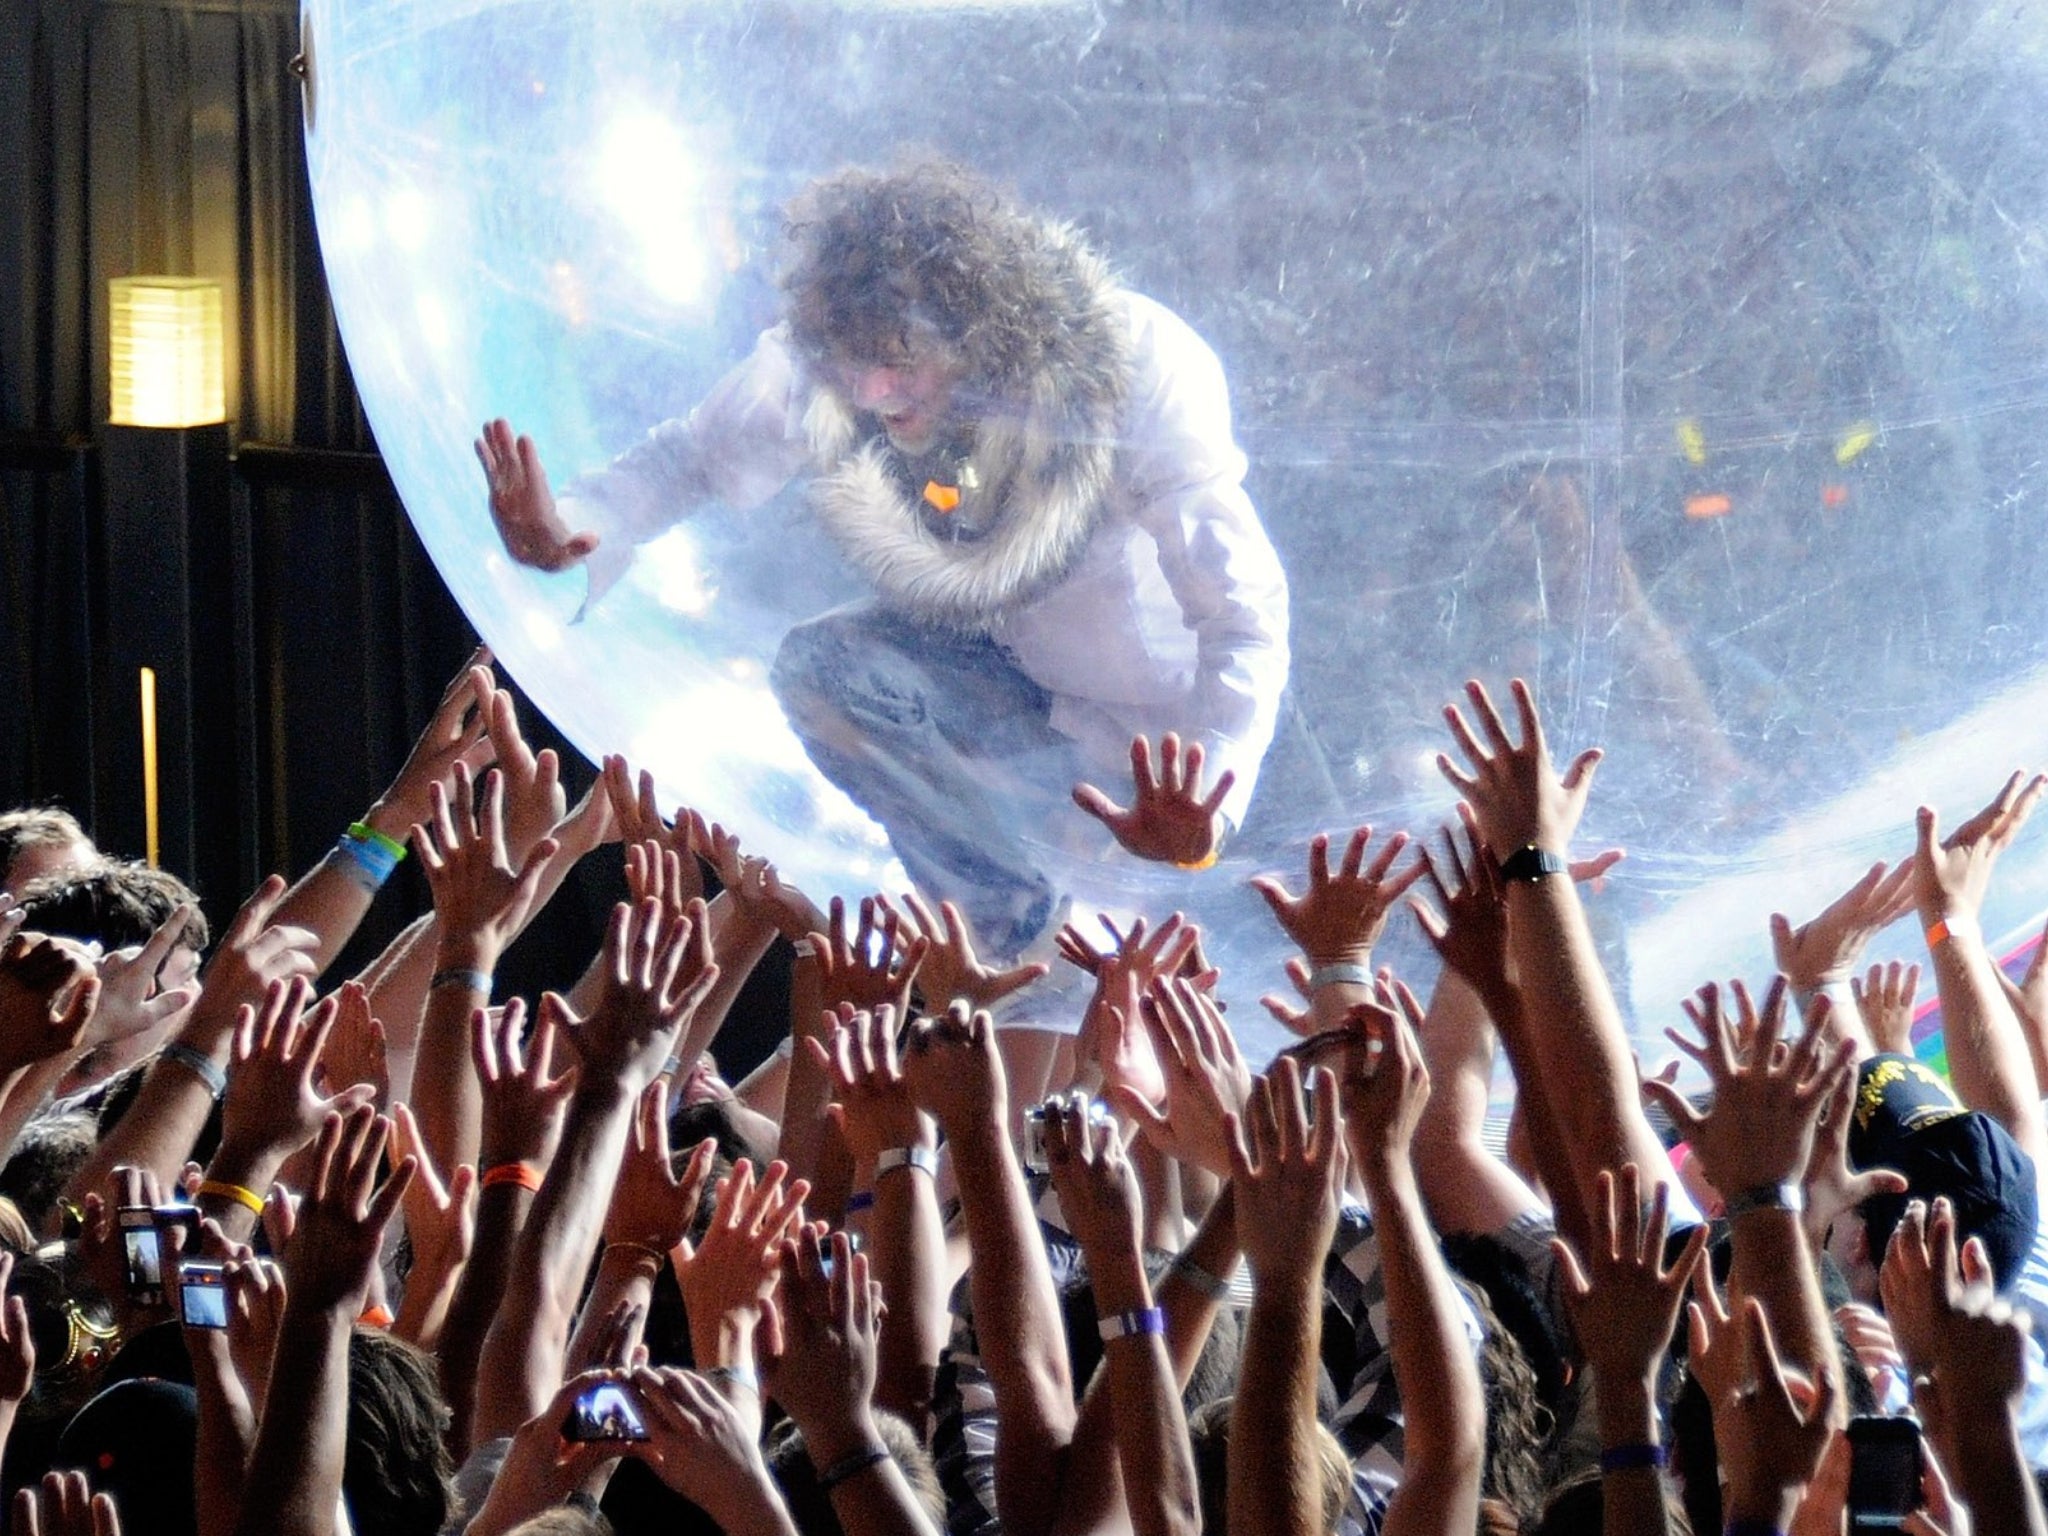 The-Flaming-Lips-perform-to-entire-crowd-encased-in-plastic.jpg